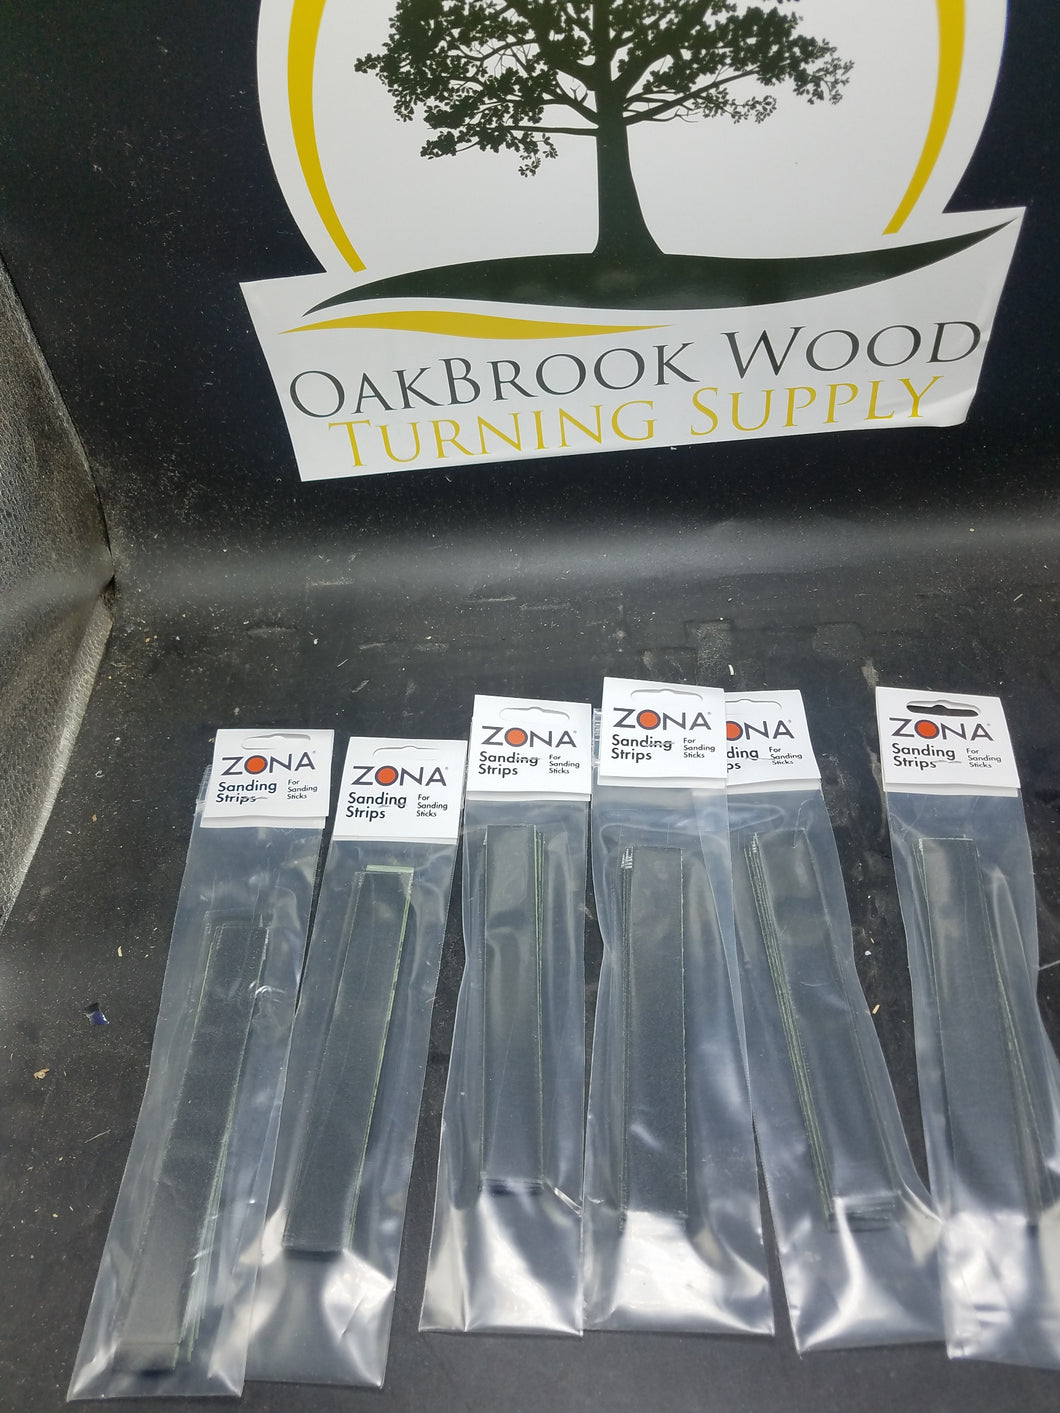 Zona replacement finger sanding strips - Oakbrook Wood Turning Supply